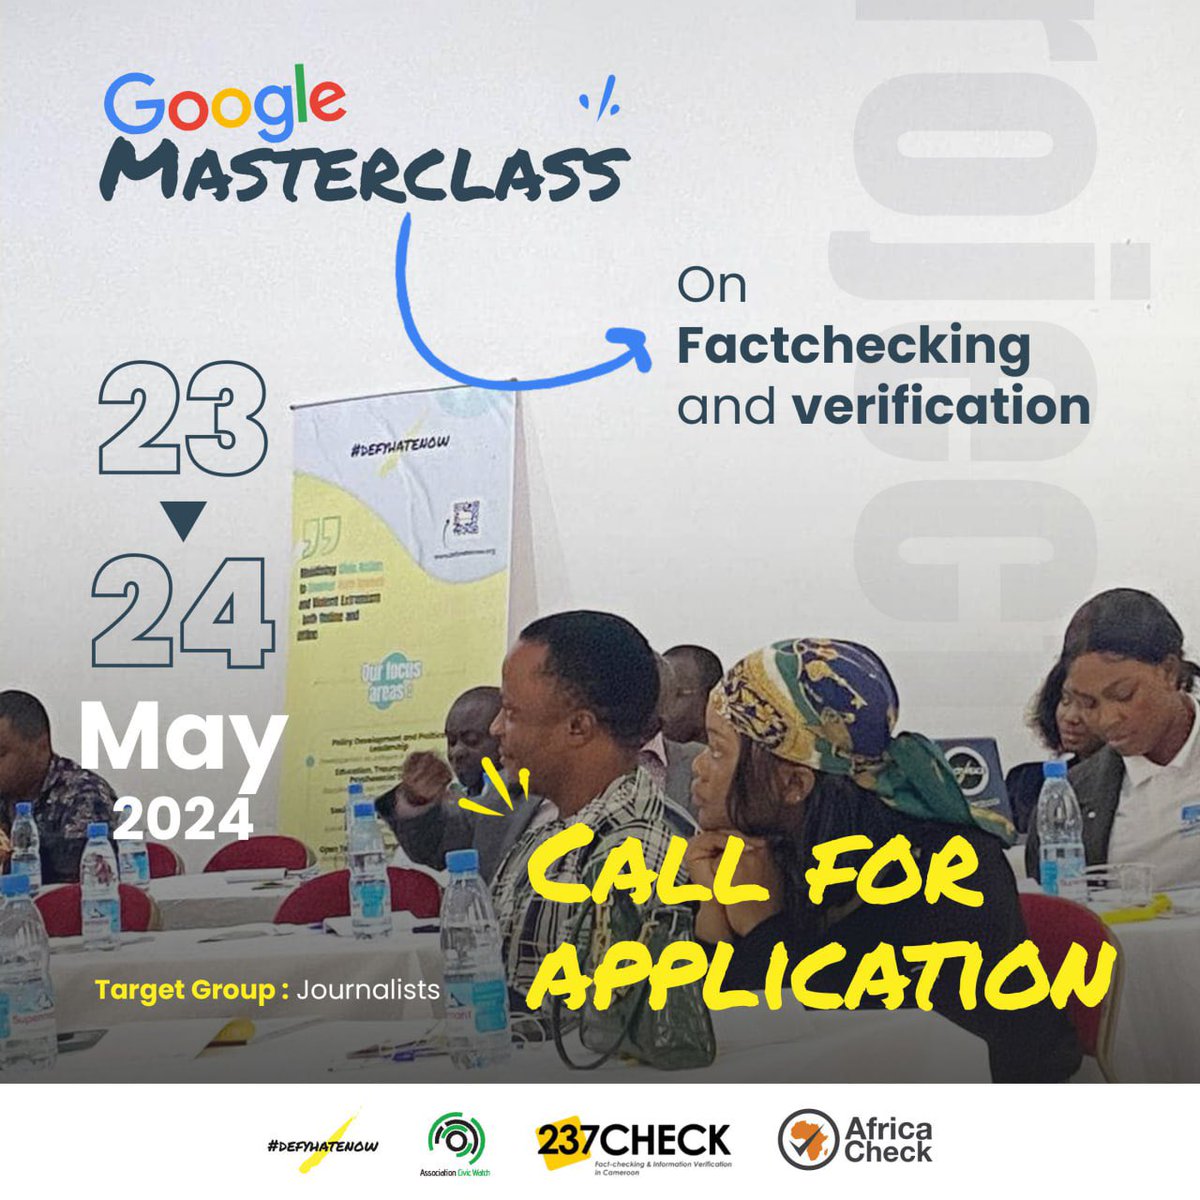 𝐎𝐩𝐩𝐨𝐫𝐭𝐮𝐧𝐢𝐭𝐲 𝐀𝐥𝐞𝐫𝐭🚨 Apply now for the Google Fact-checking and verification Masterclass for journalists in Cameroon coordinated by @237check & @AfricaCheck to hold in 🇨🇲 To register & know more 👉🏼forms.gle/1oeMfTjqCiz5o8… Deadline: May 12, 2024 #FactsMatter